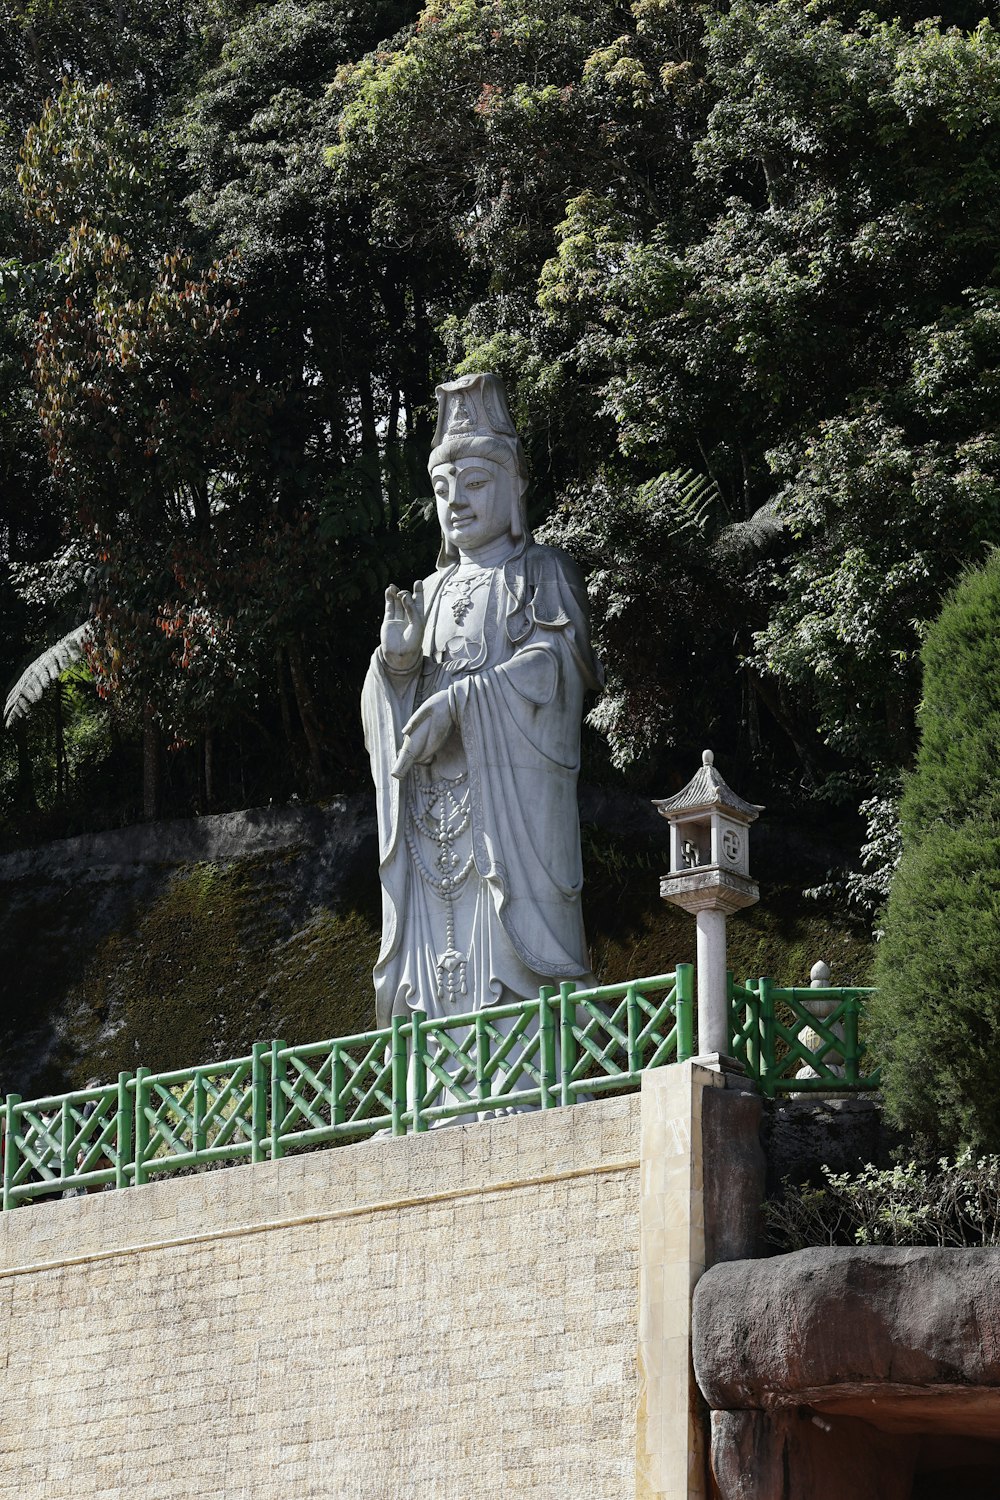 a statue of a person holding a bird on a bridge